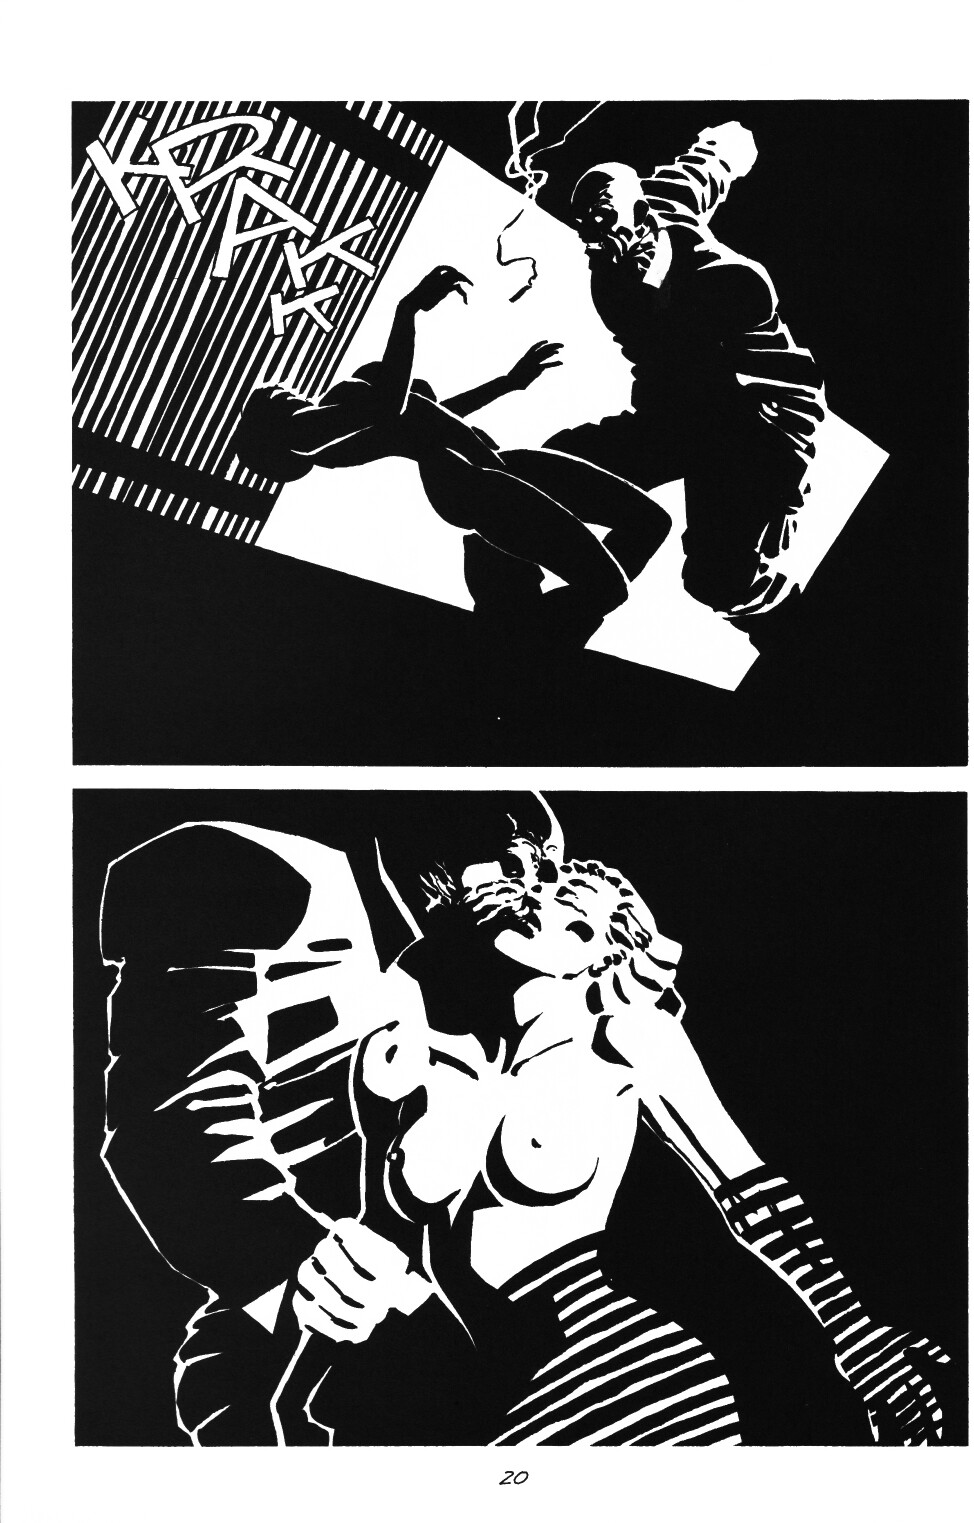 Sin City: A Dame To Kill For Episode 2-B